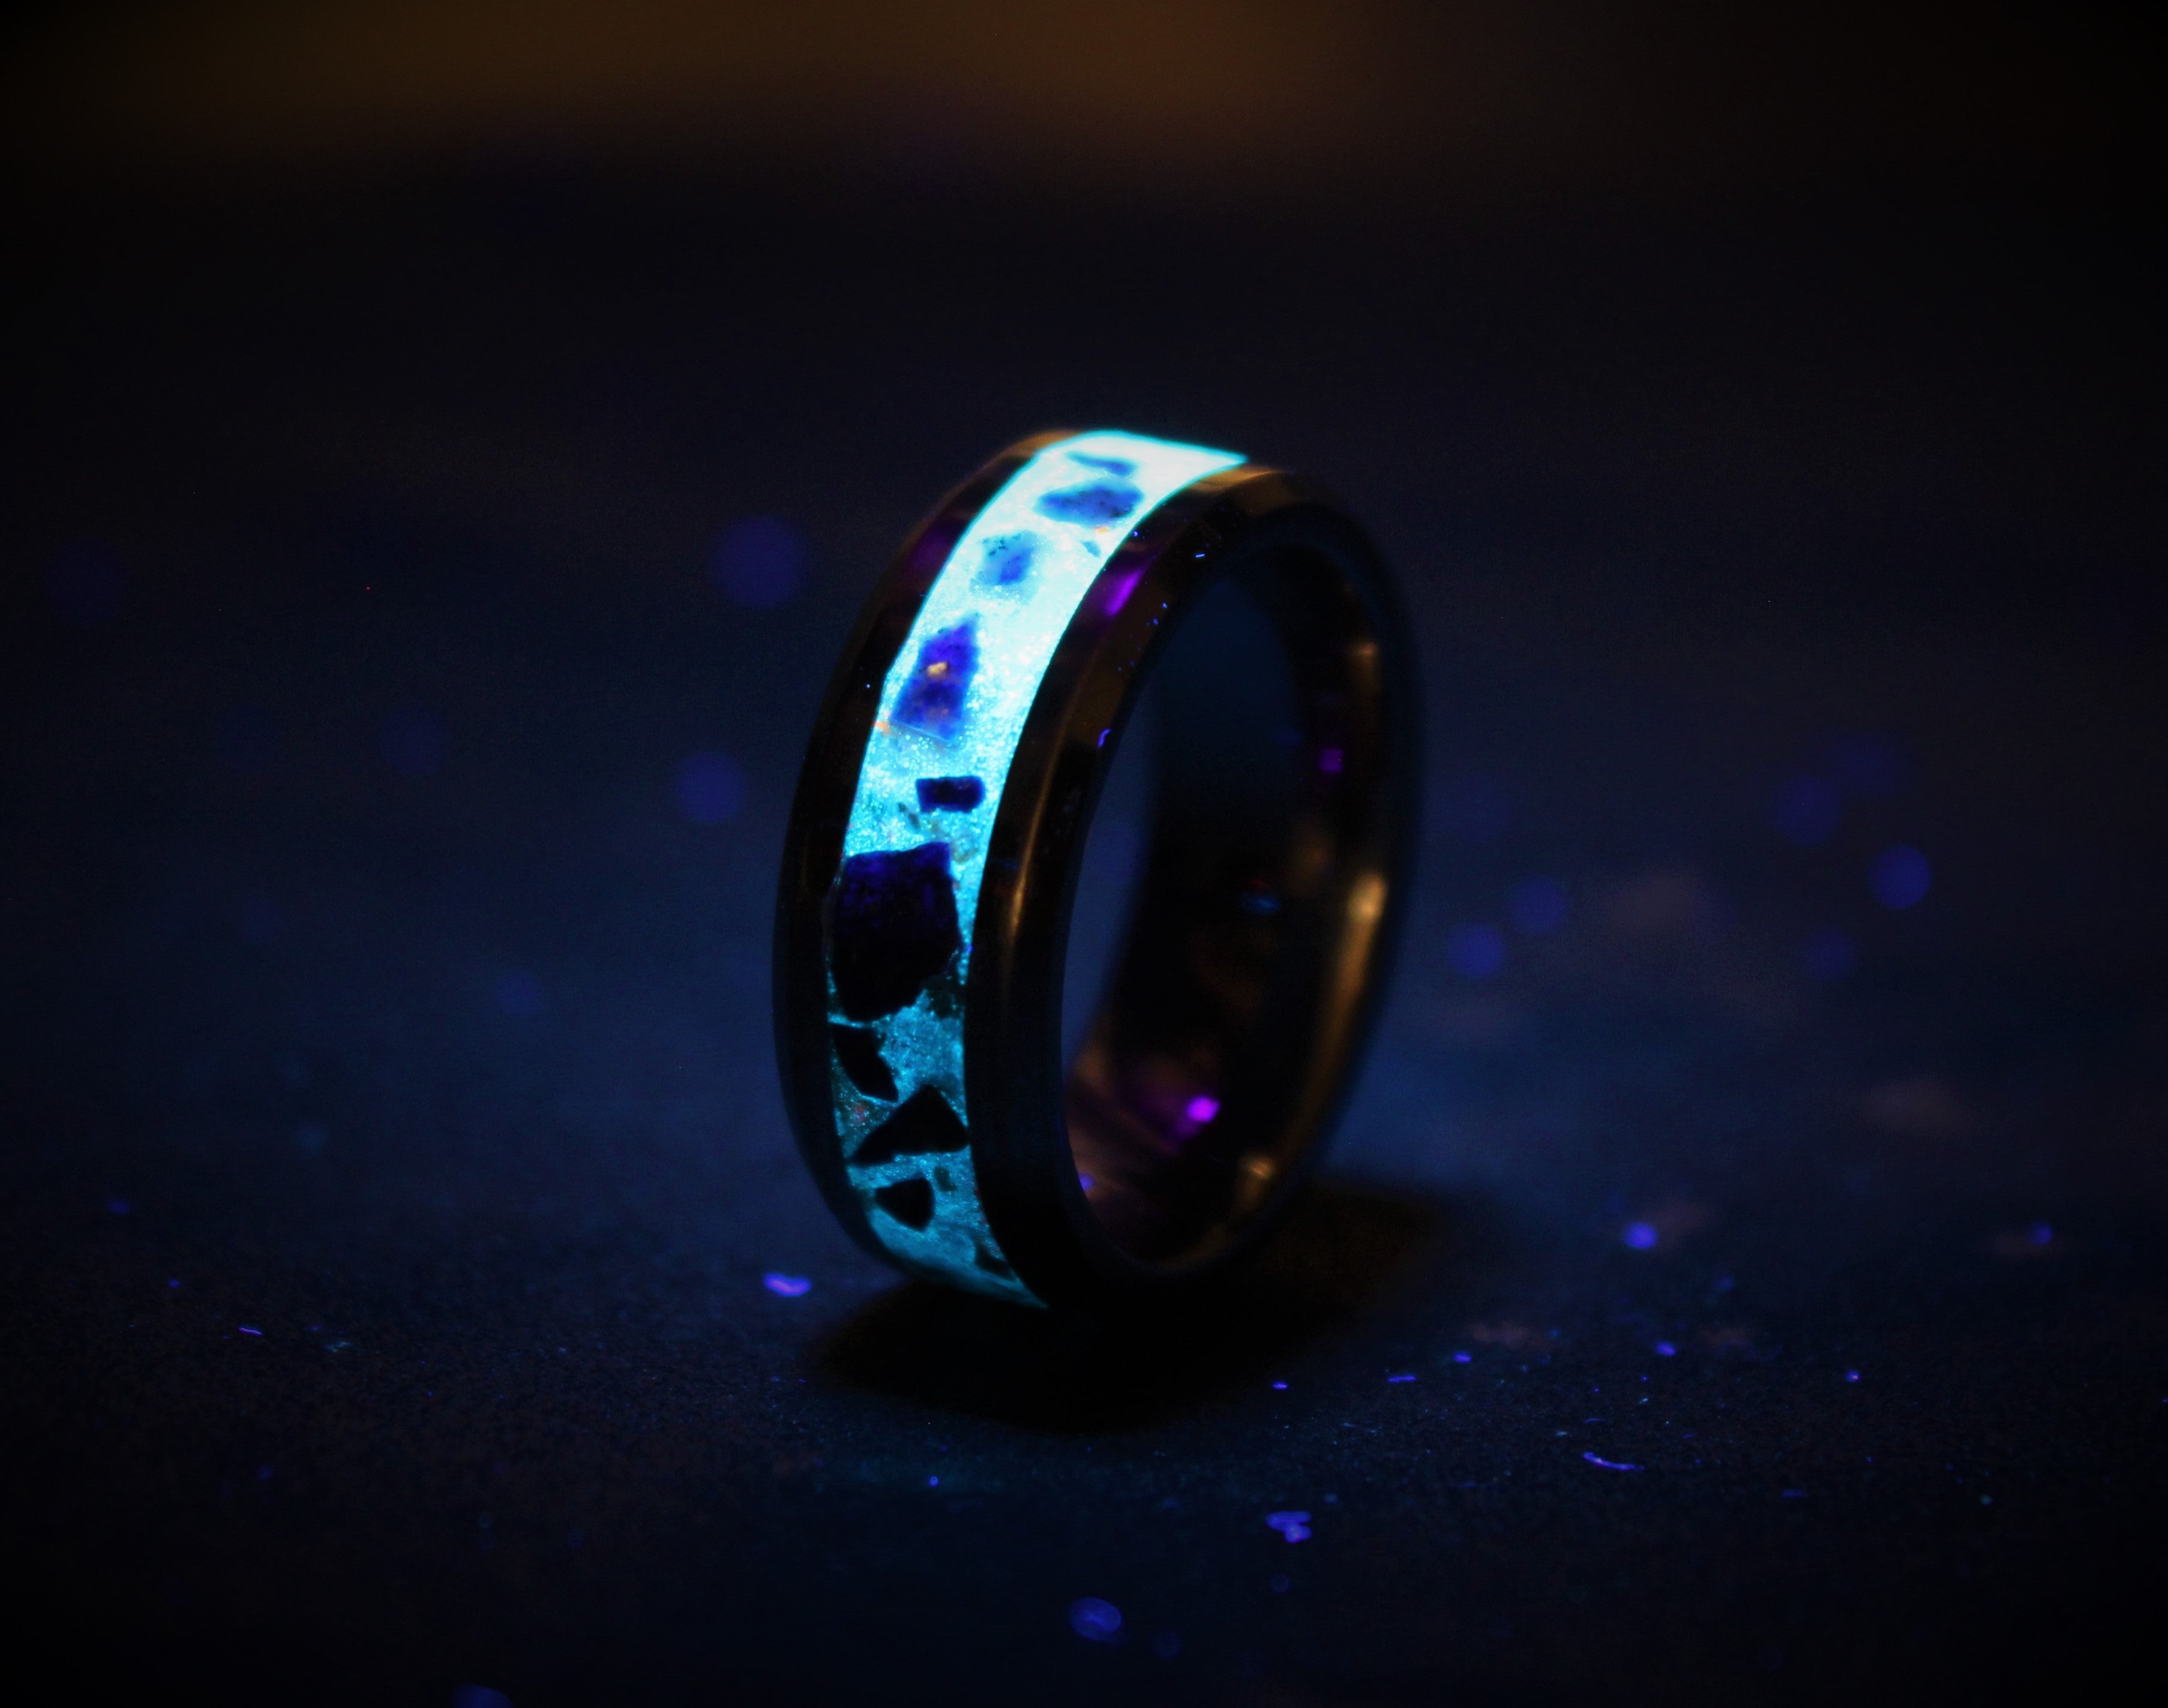 Buy Titanium Ring With Offset Azure Opal Inlay, Titanium Opal Glow Inlay  Wedding Ring Online in India - Etsy